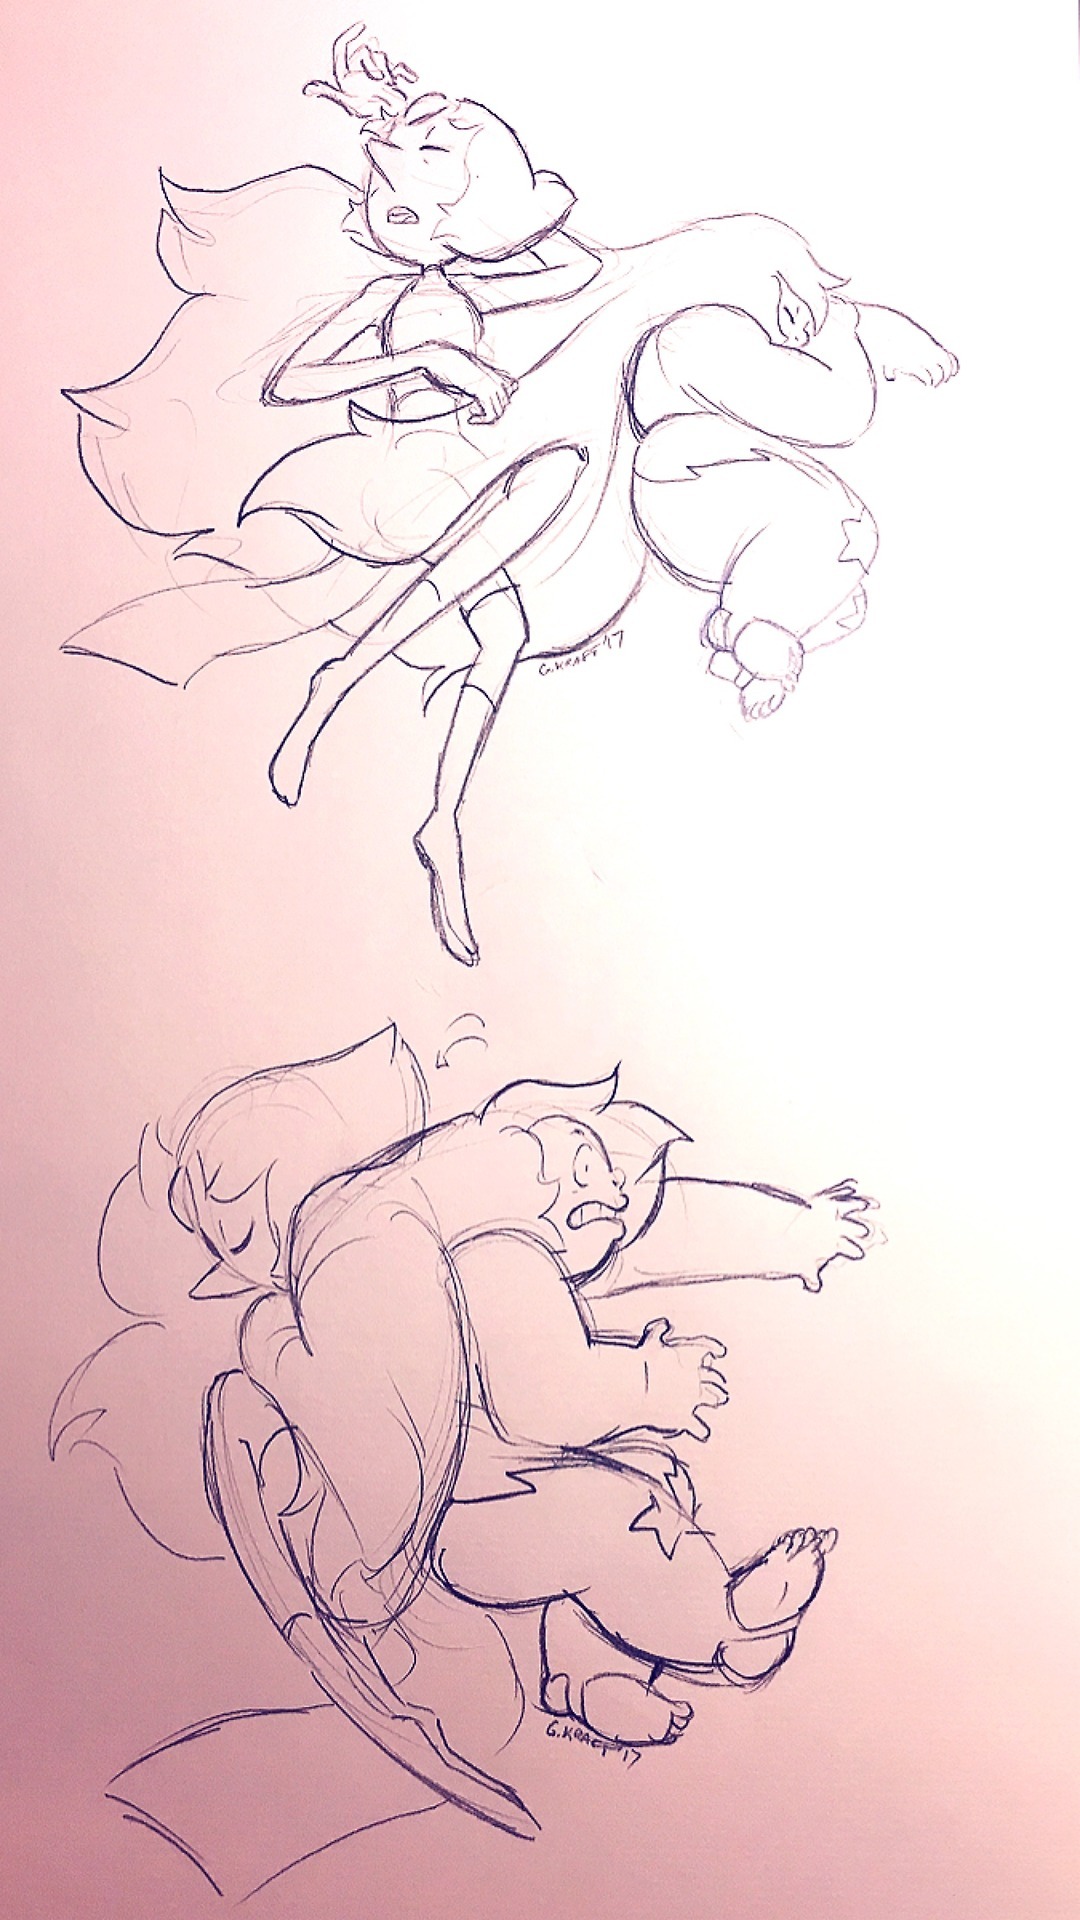 Have a small collection of sketches from Twitter for Pearlmethyst week